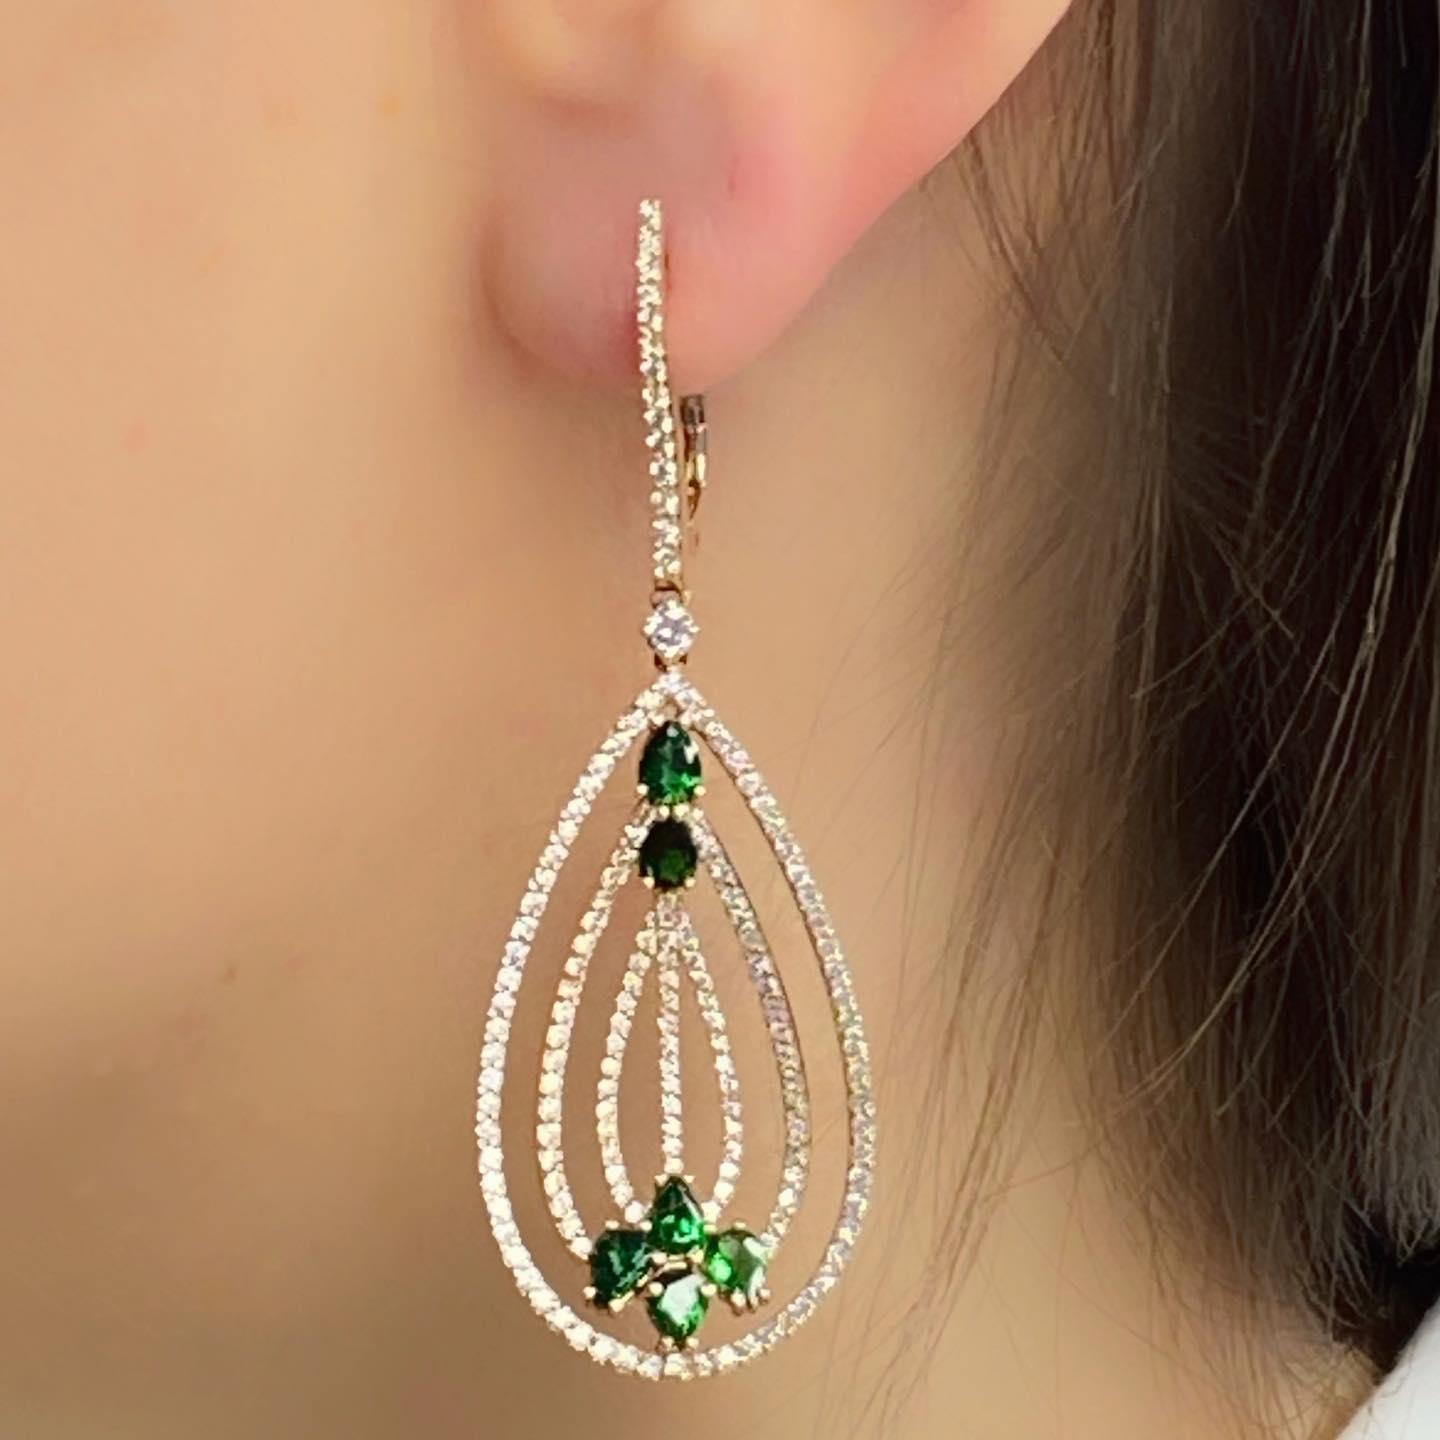 These RADIOSA dangling earrings are a versatile choice, allowing for movement and adding dynamic flair to any outfit. They can be the perfect statement piece for special occasions or add a touch of elegance & colour to everyday wear.
Tzavorite is a